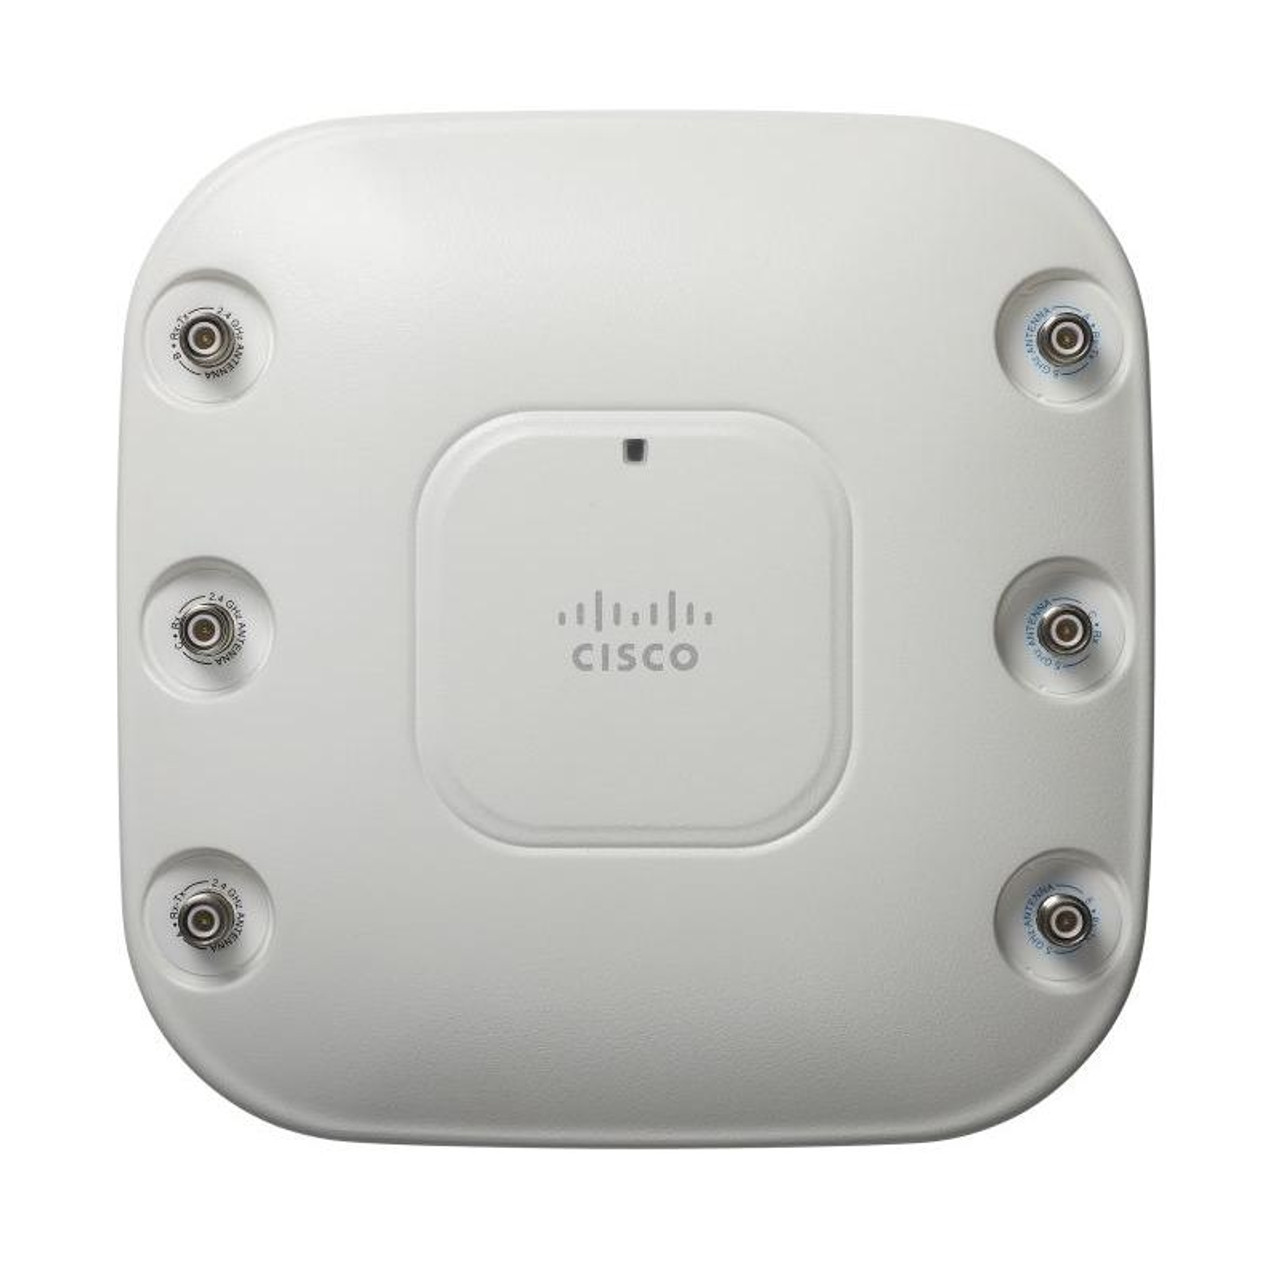 CISCO AIRONET 1260 SERIES ACCESS POINT (CONTROLLER-BASED) - RADIO ACCESS POINT